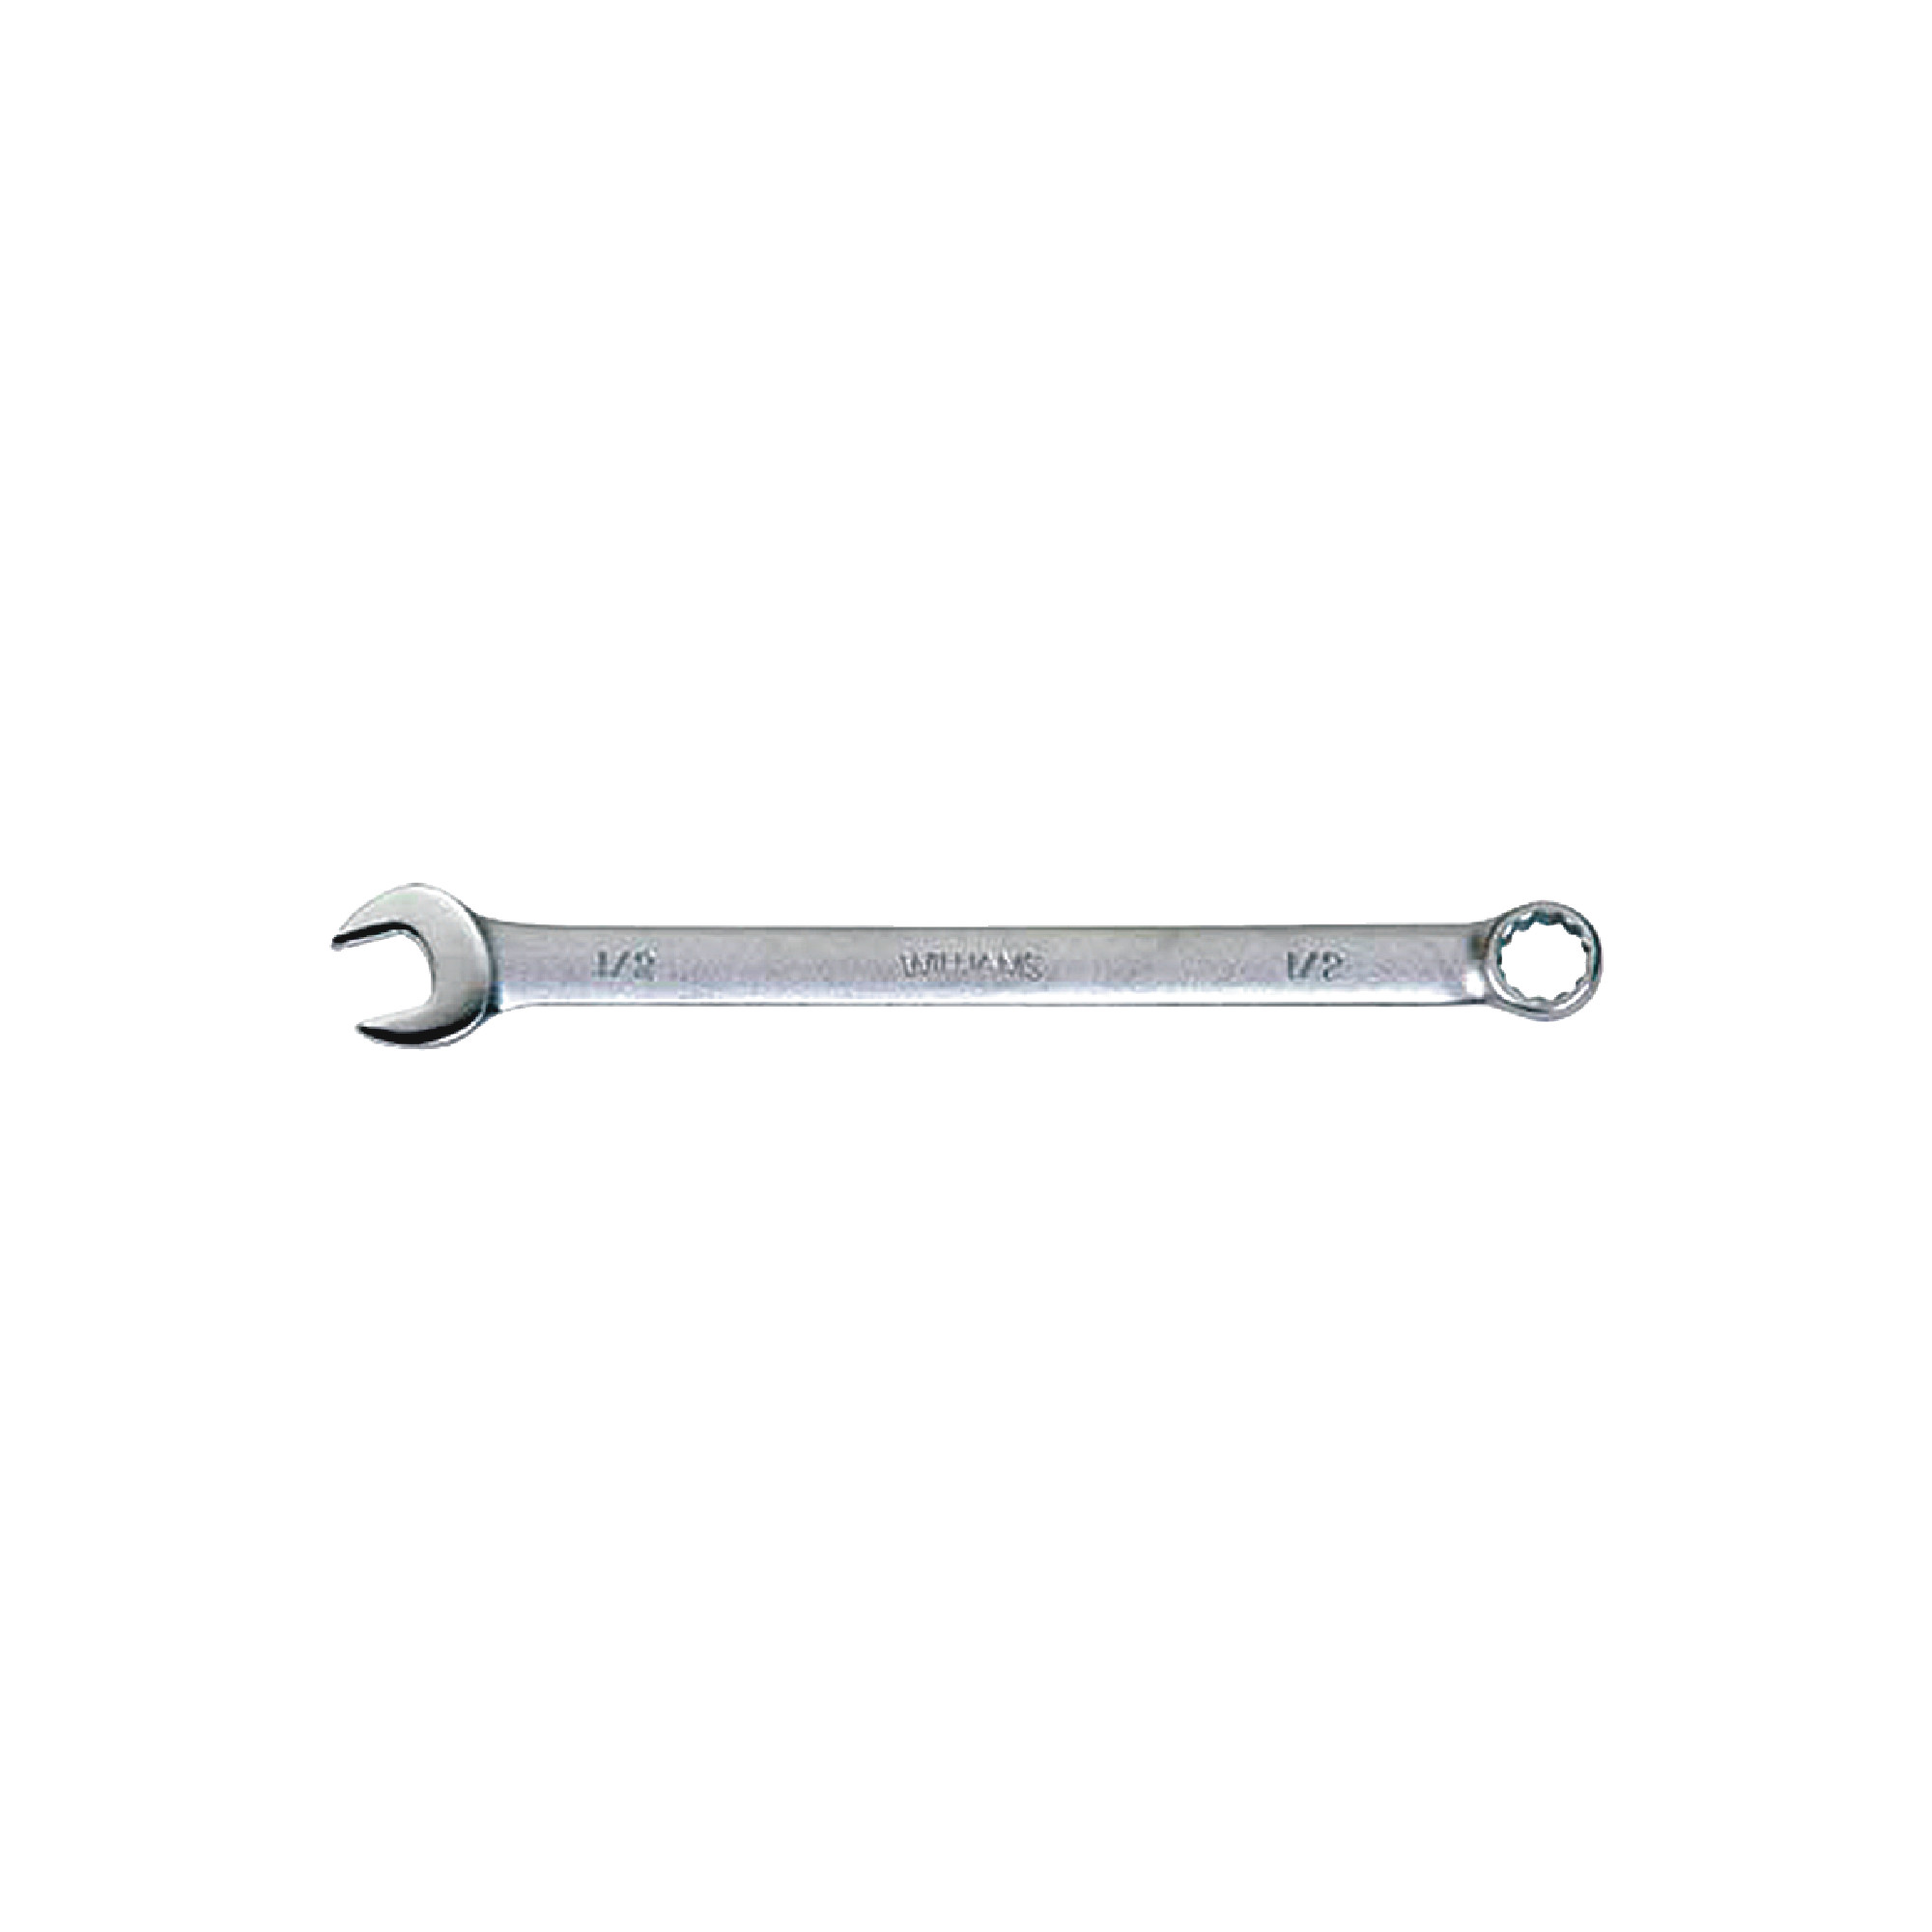 Satin Chrome Finish 27mm Combination Wrench